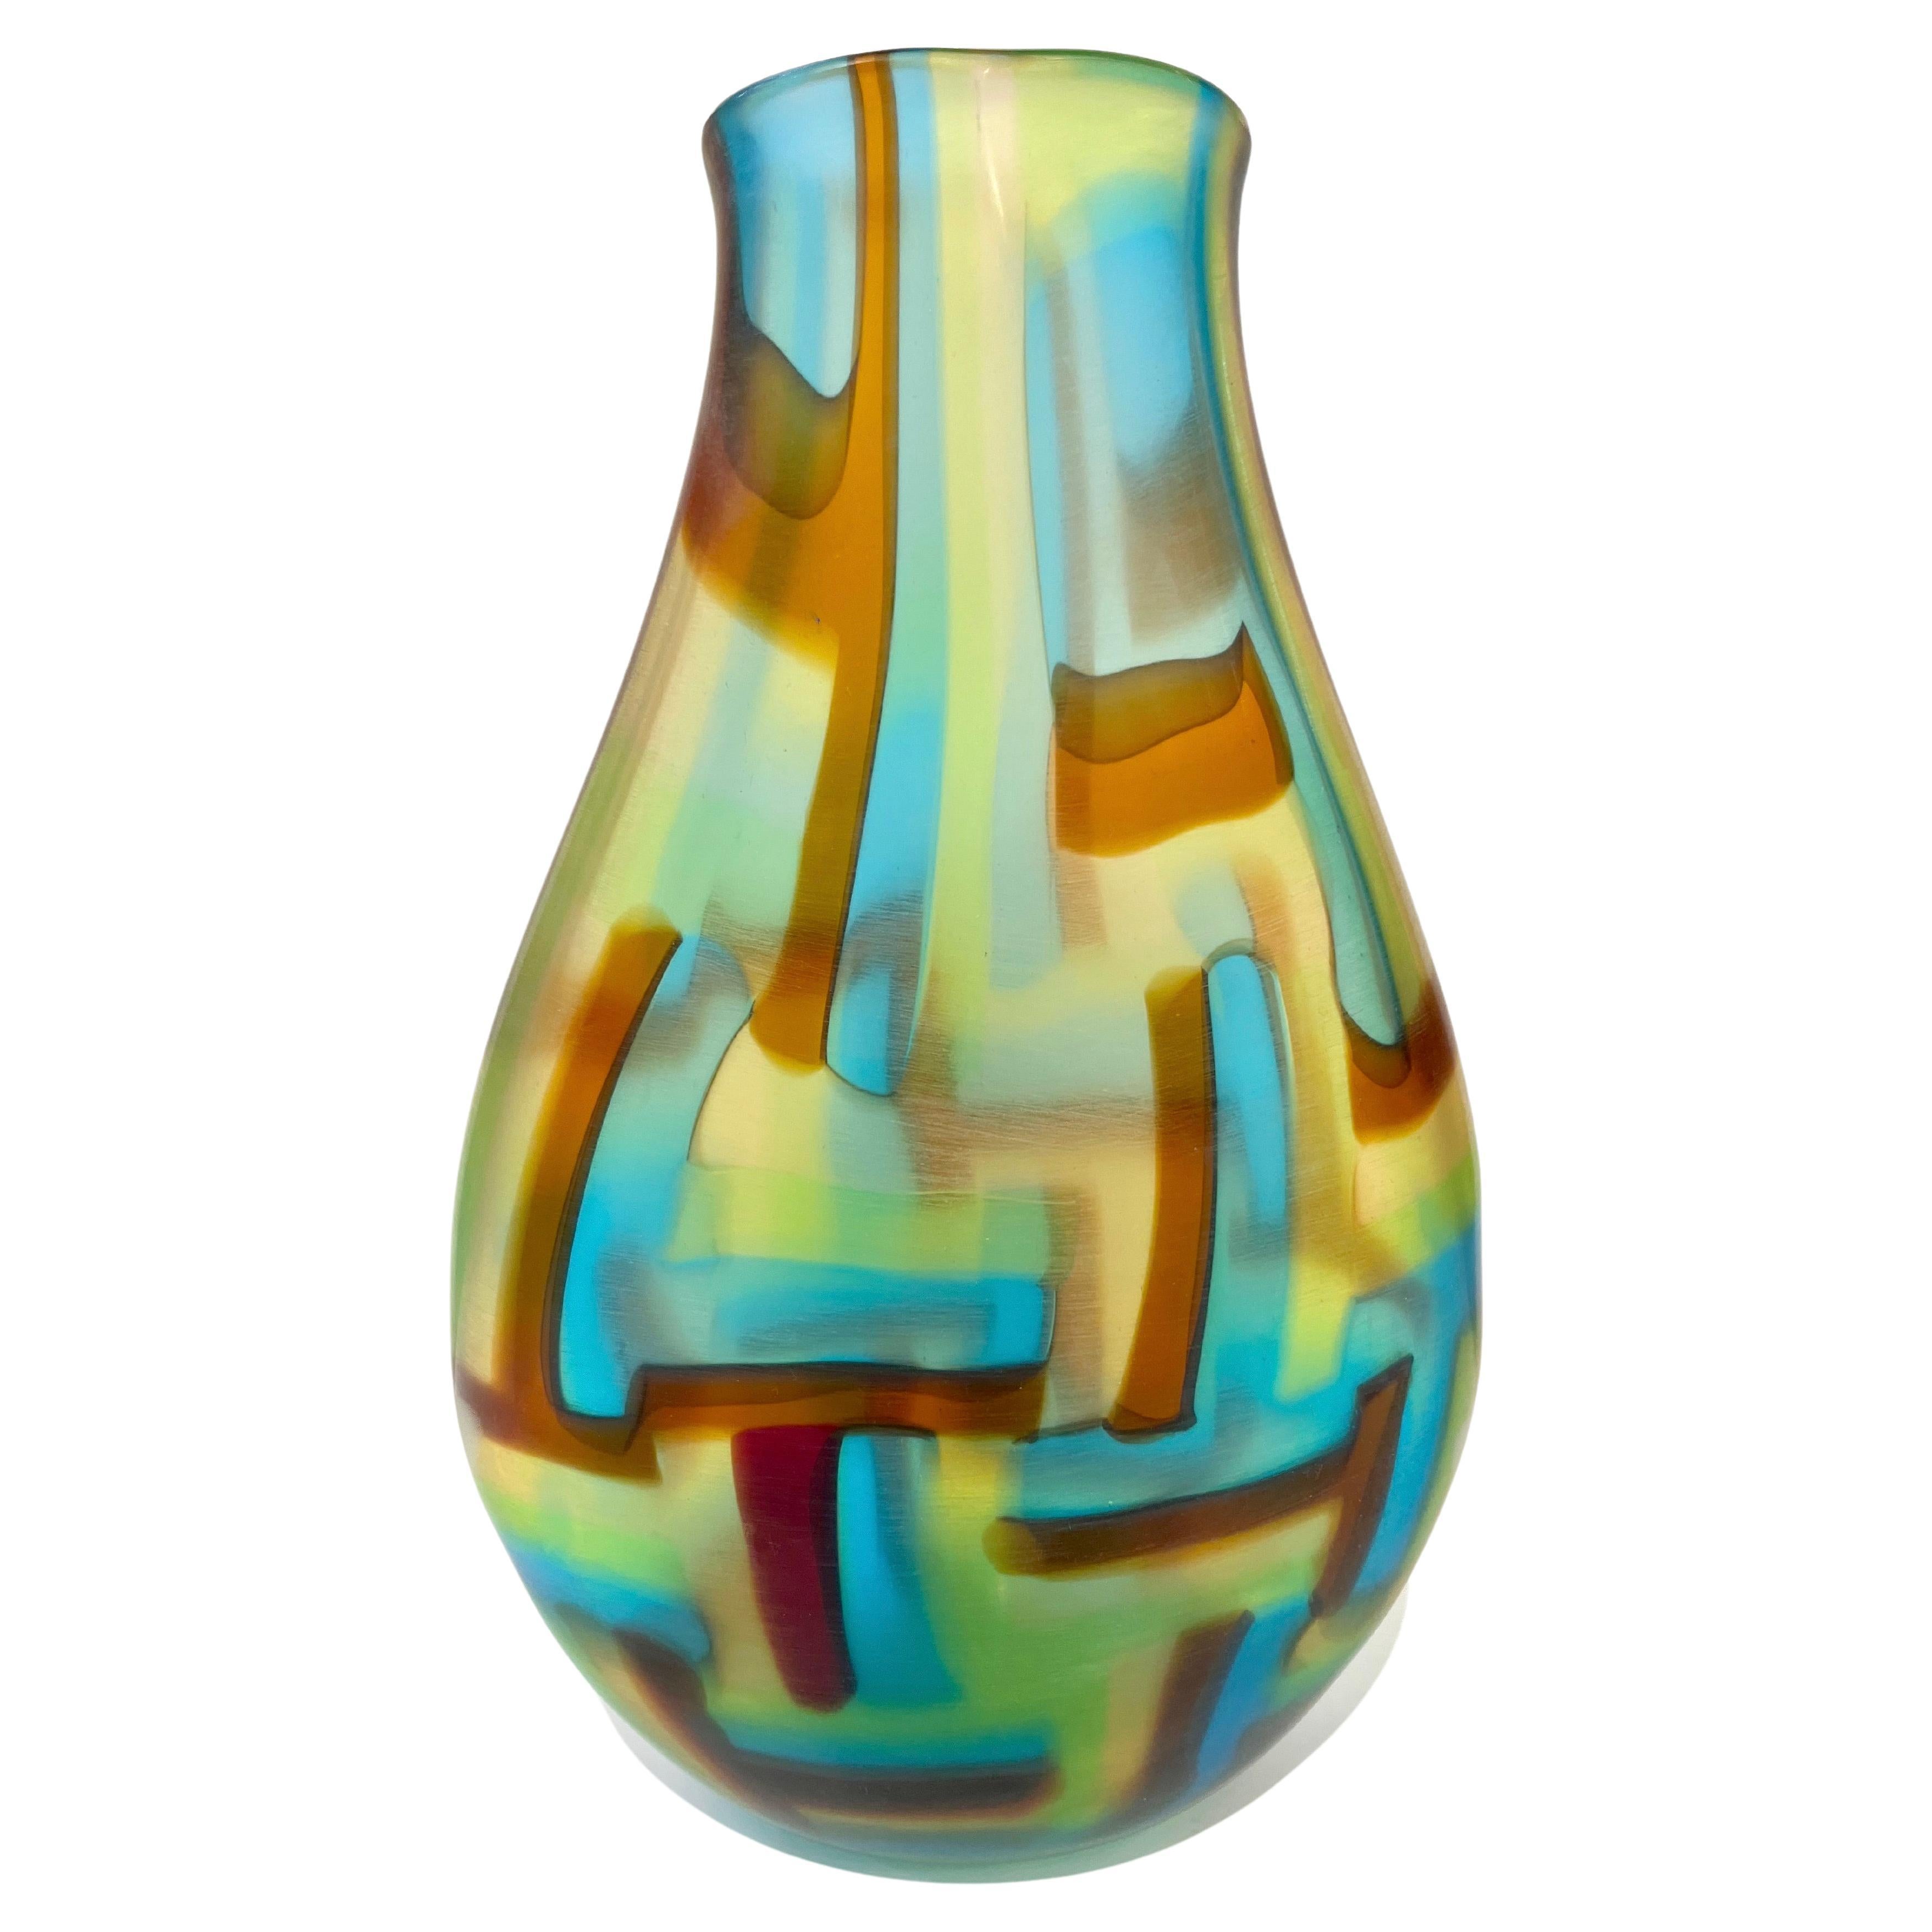 Afro Celotto Early 2000s Italian Turquoise Yellow Green Amber Murano Glass Vase For Sale